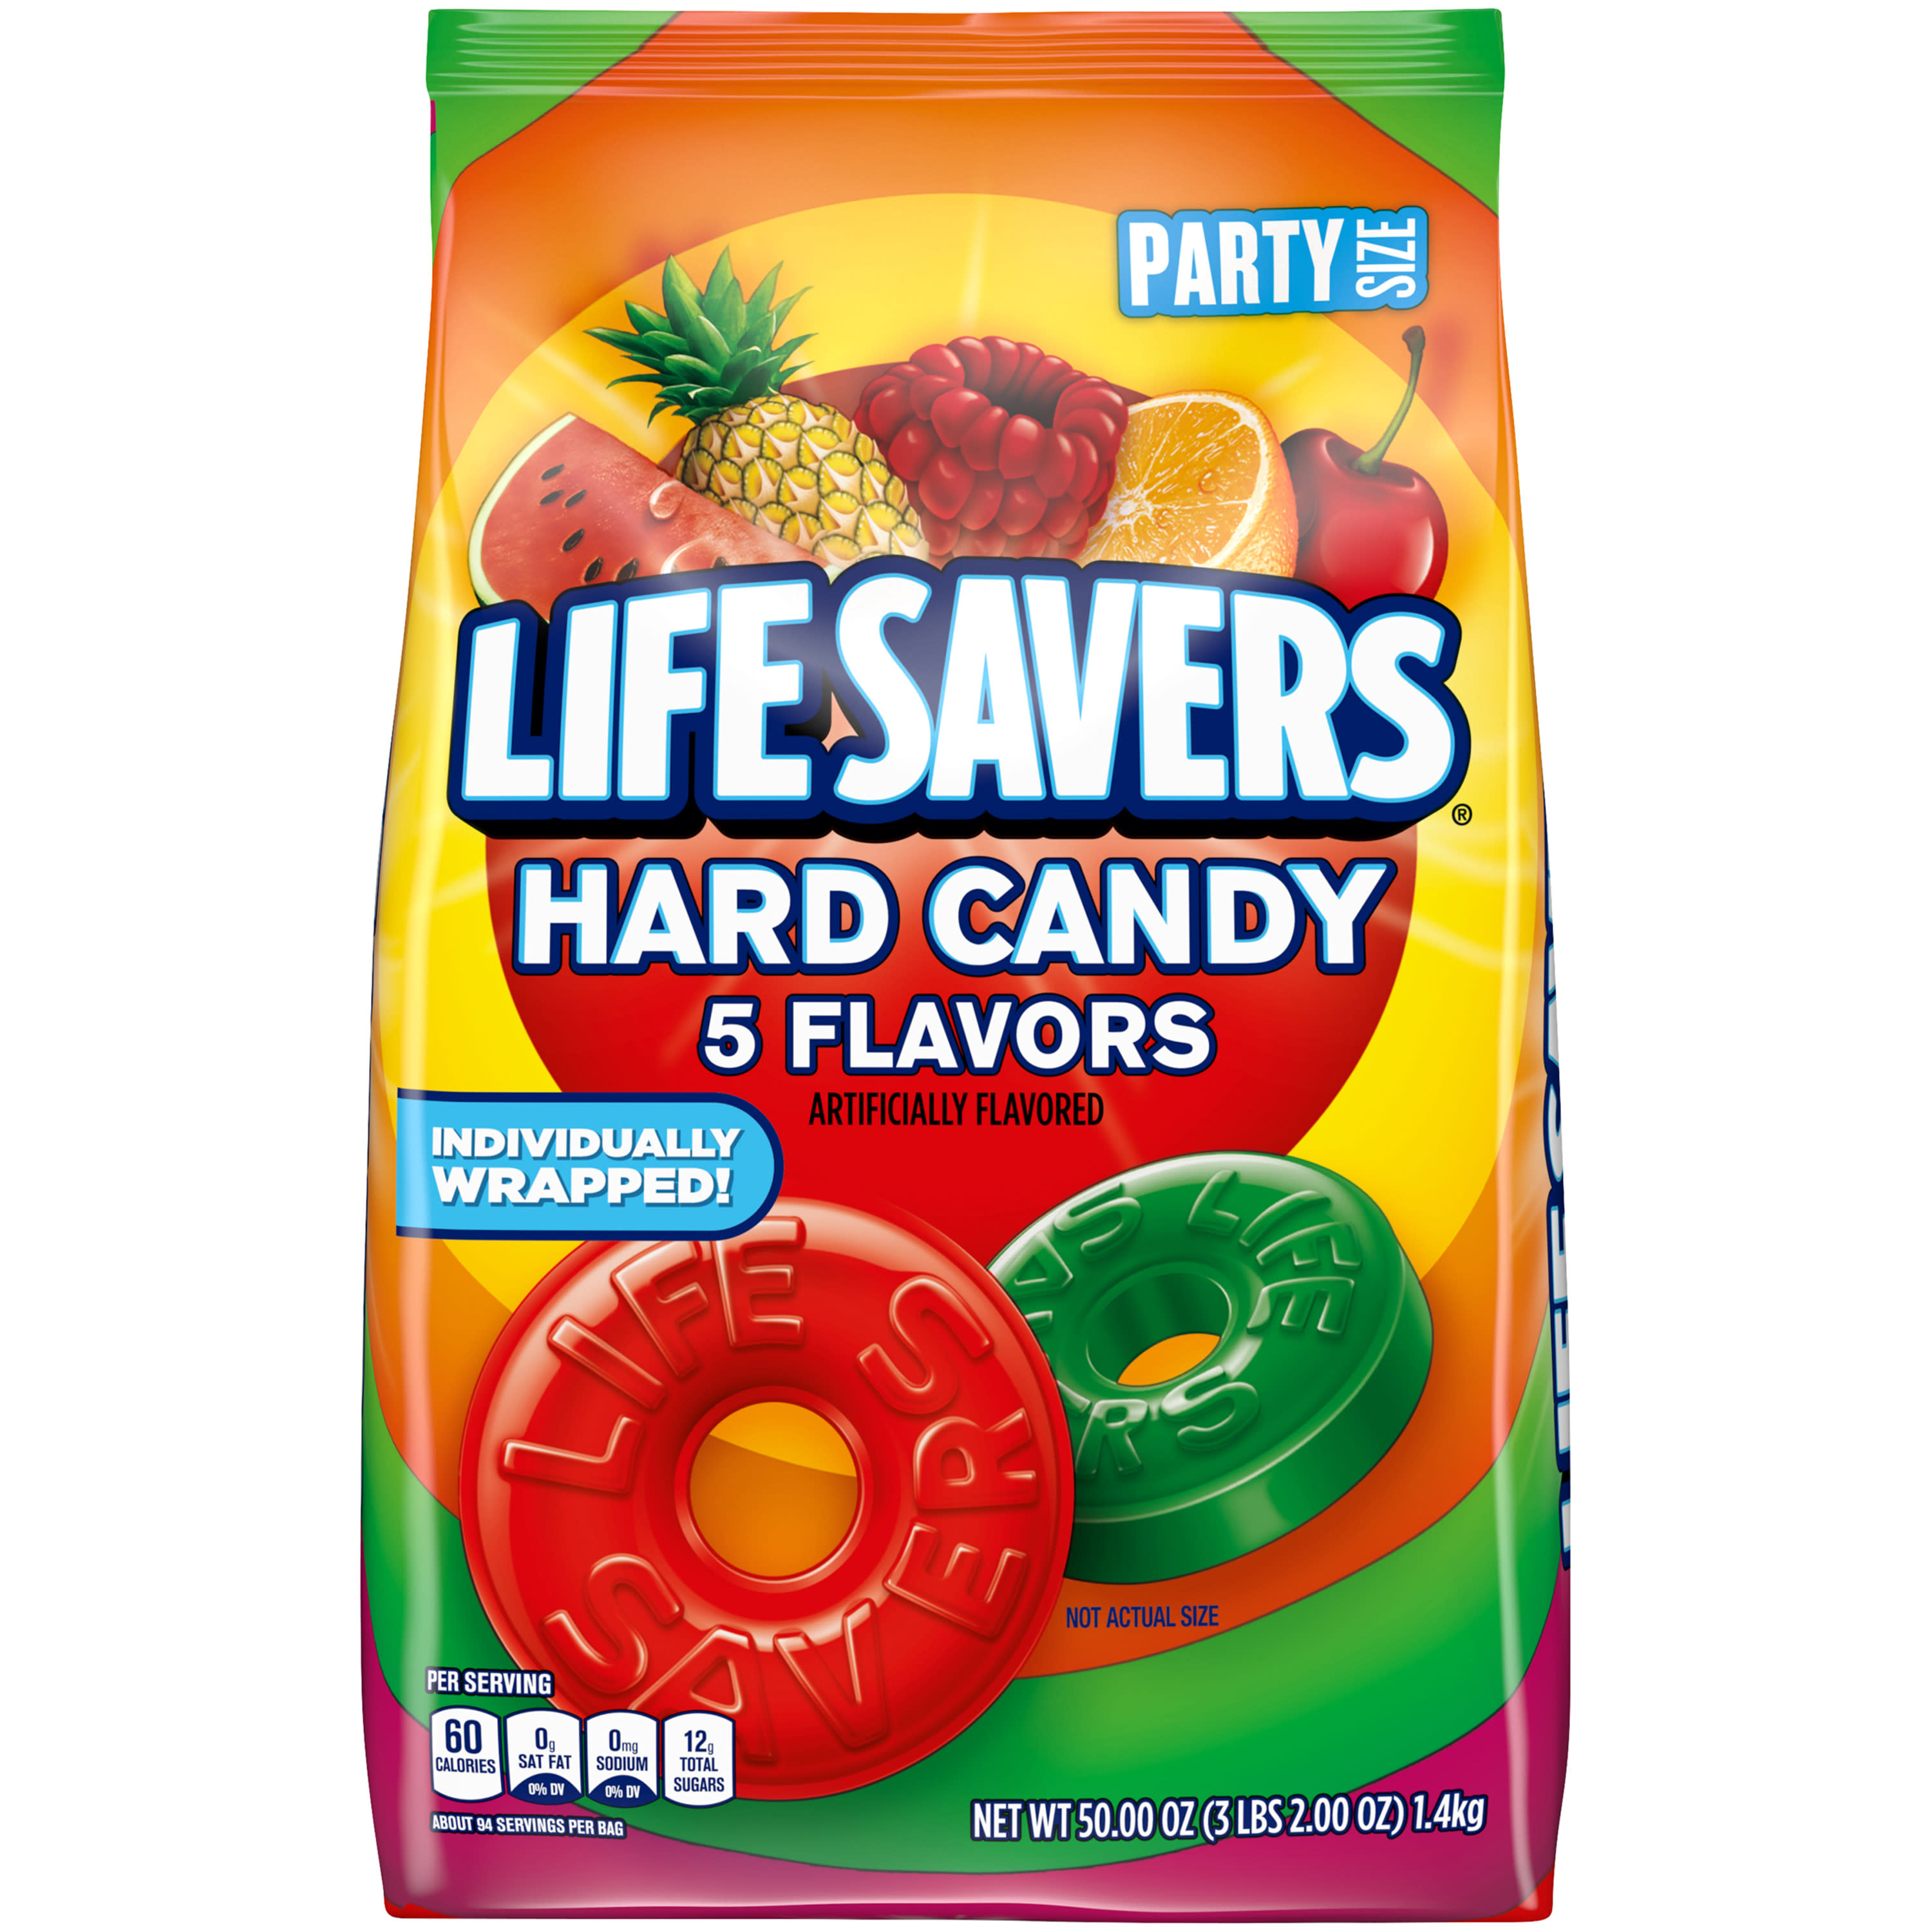 Life Savers 5 Flavors Hard Candy, Party Size - 50 oz Bag - image 1 of 14